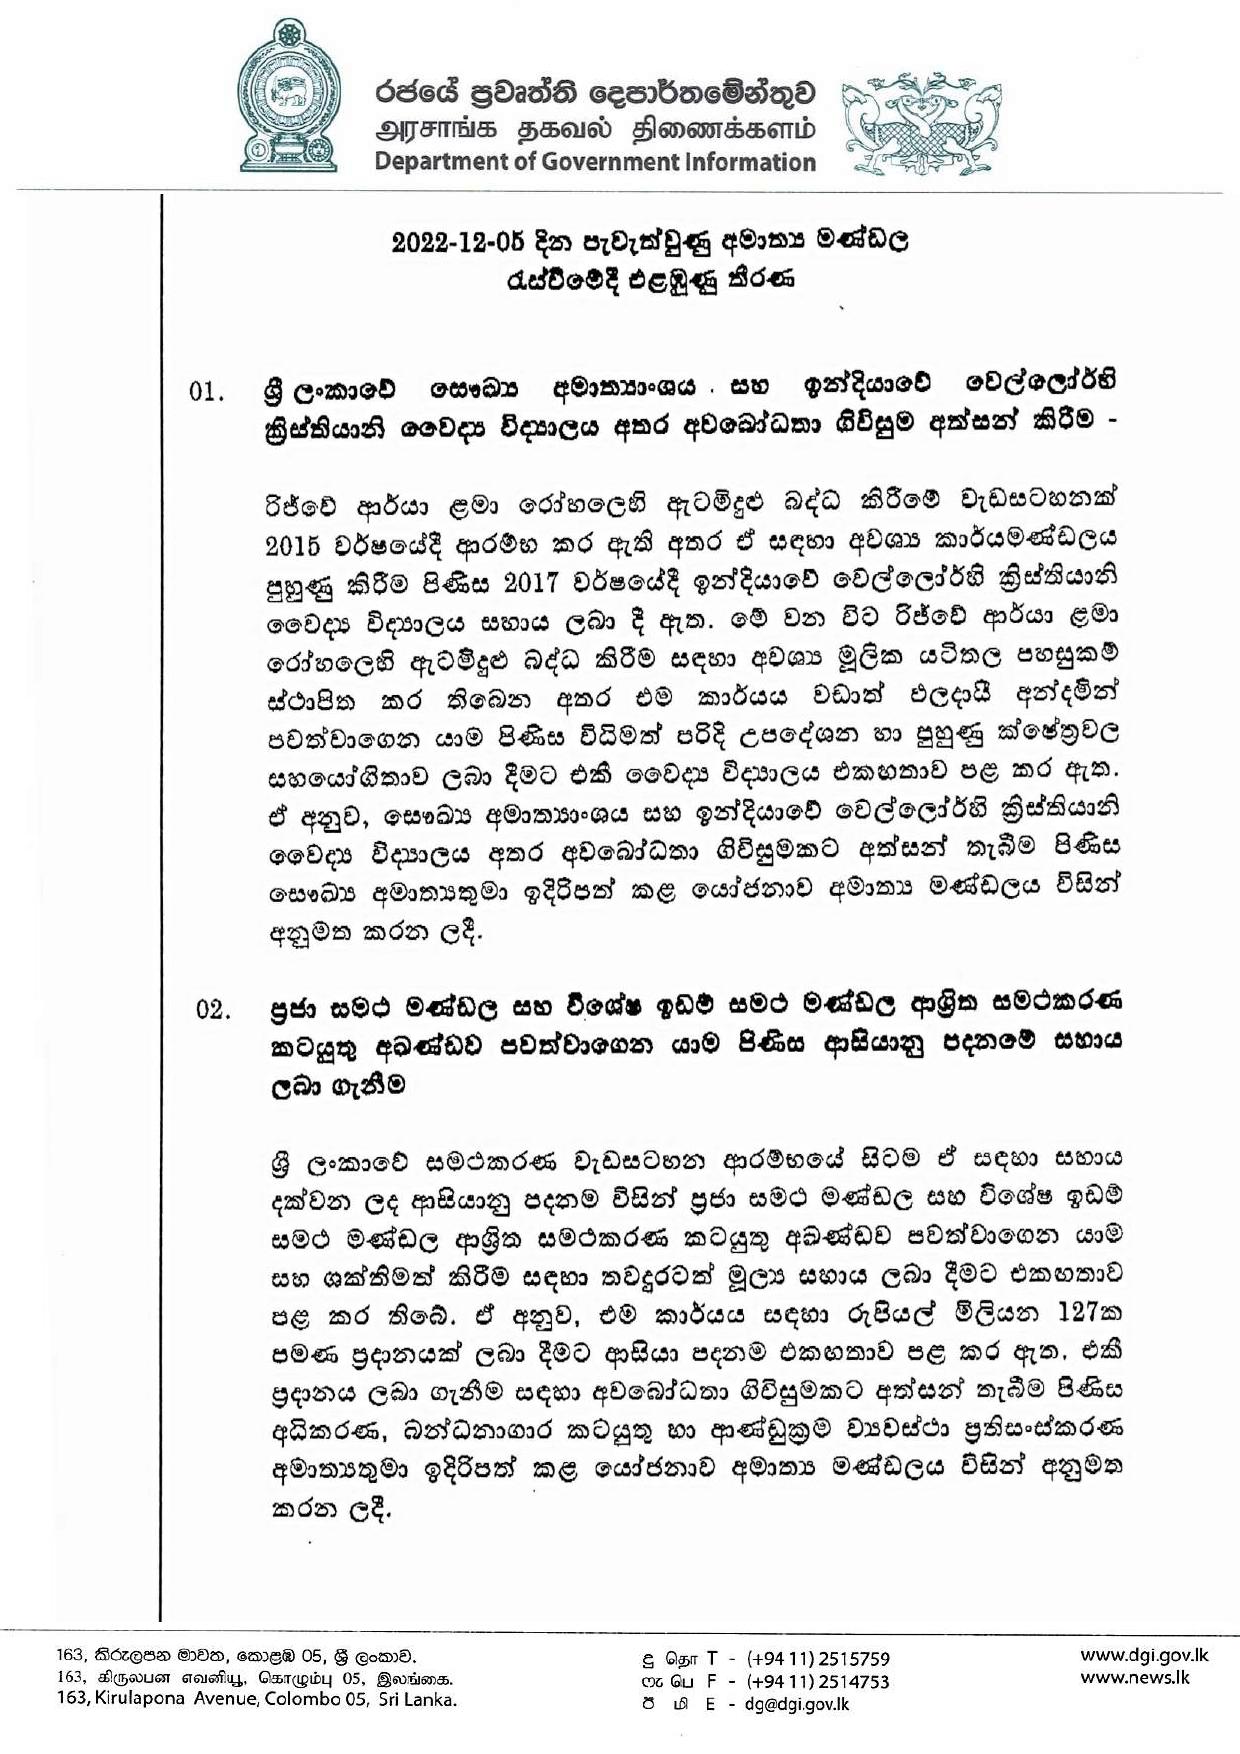 Cabinet Decisions on 05.12.2022 page 001